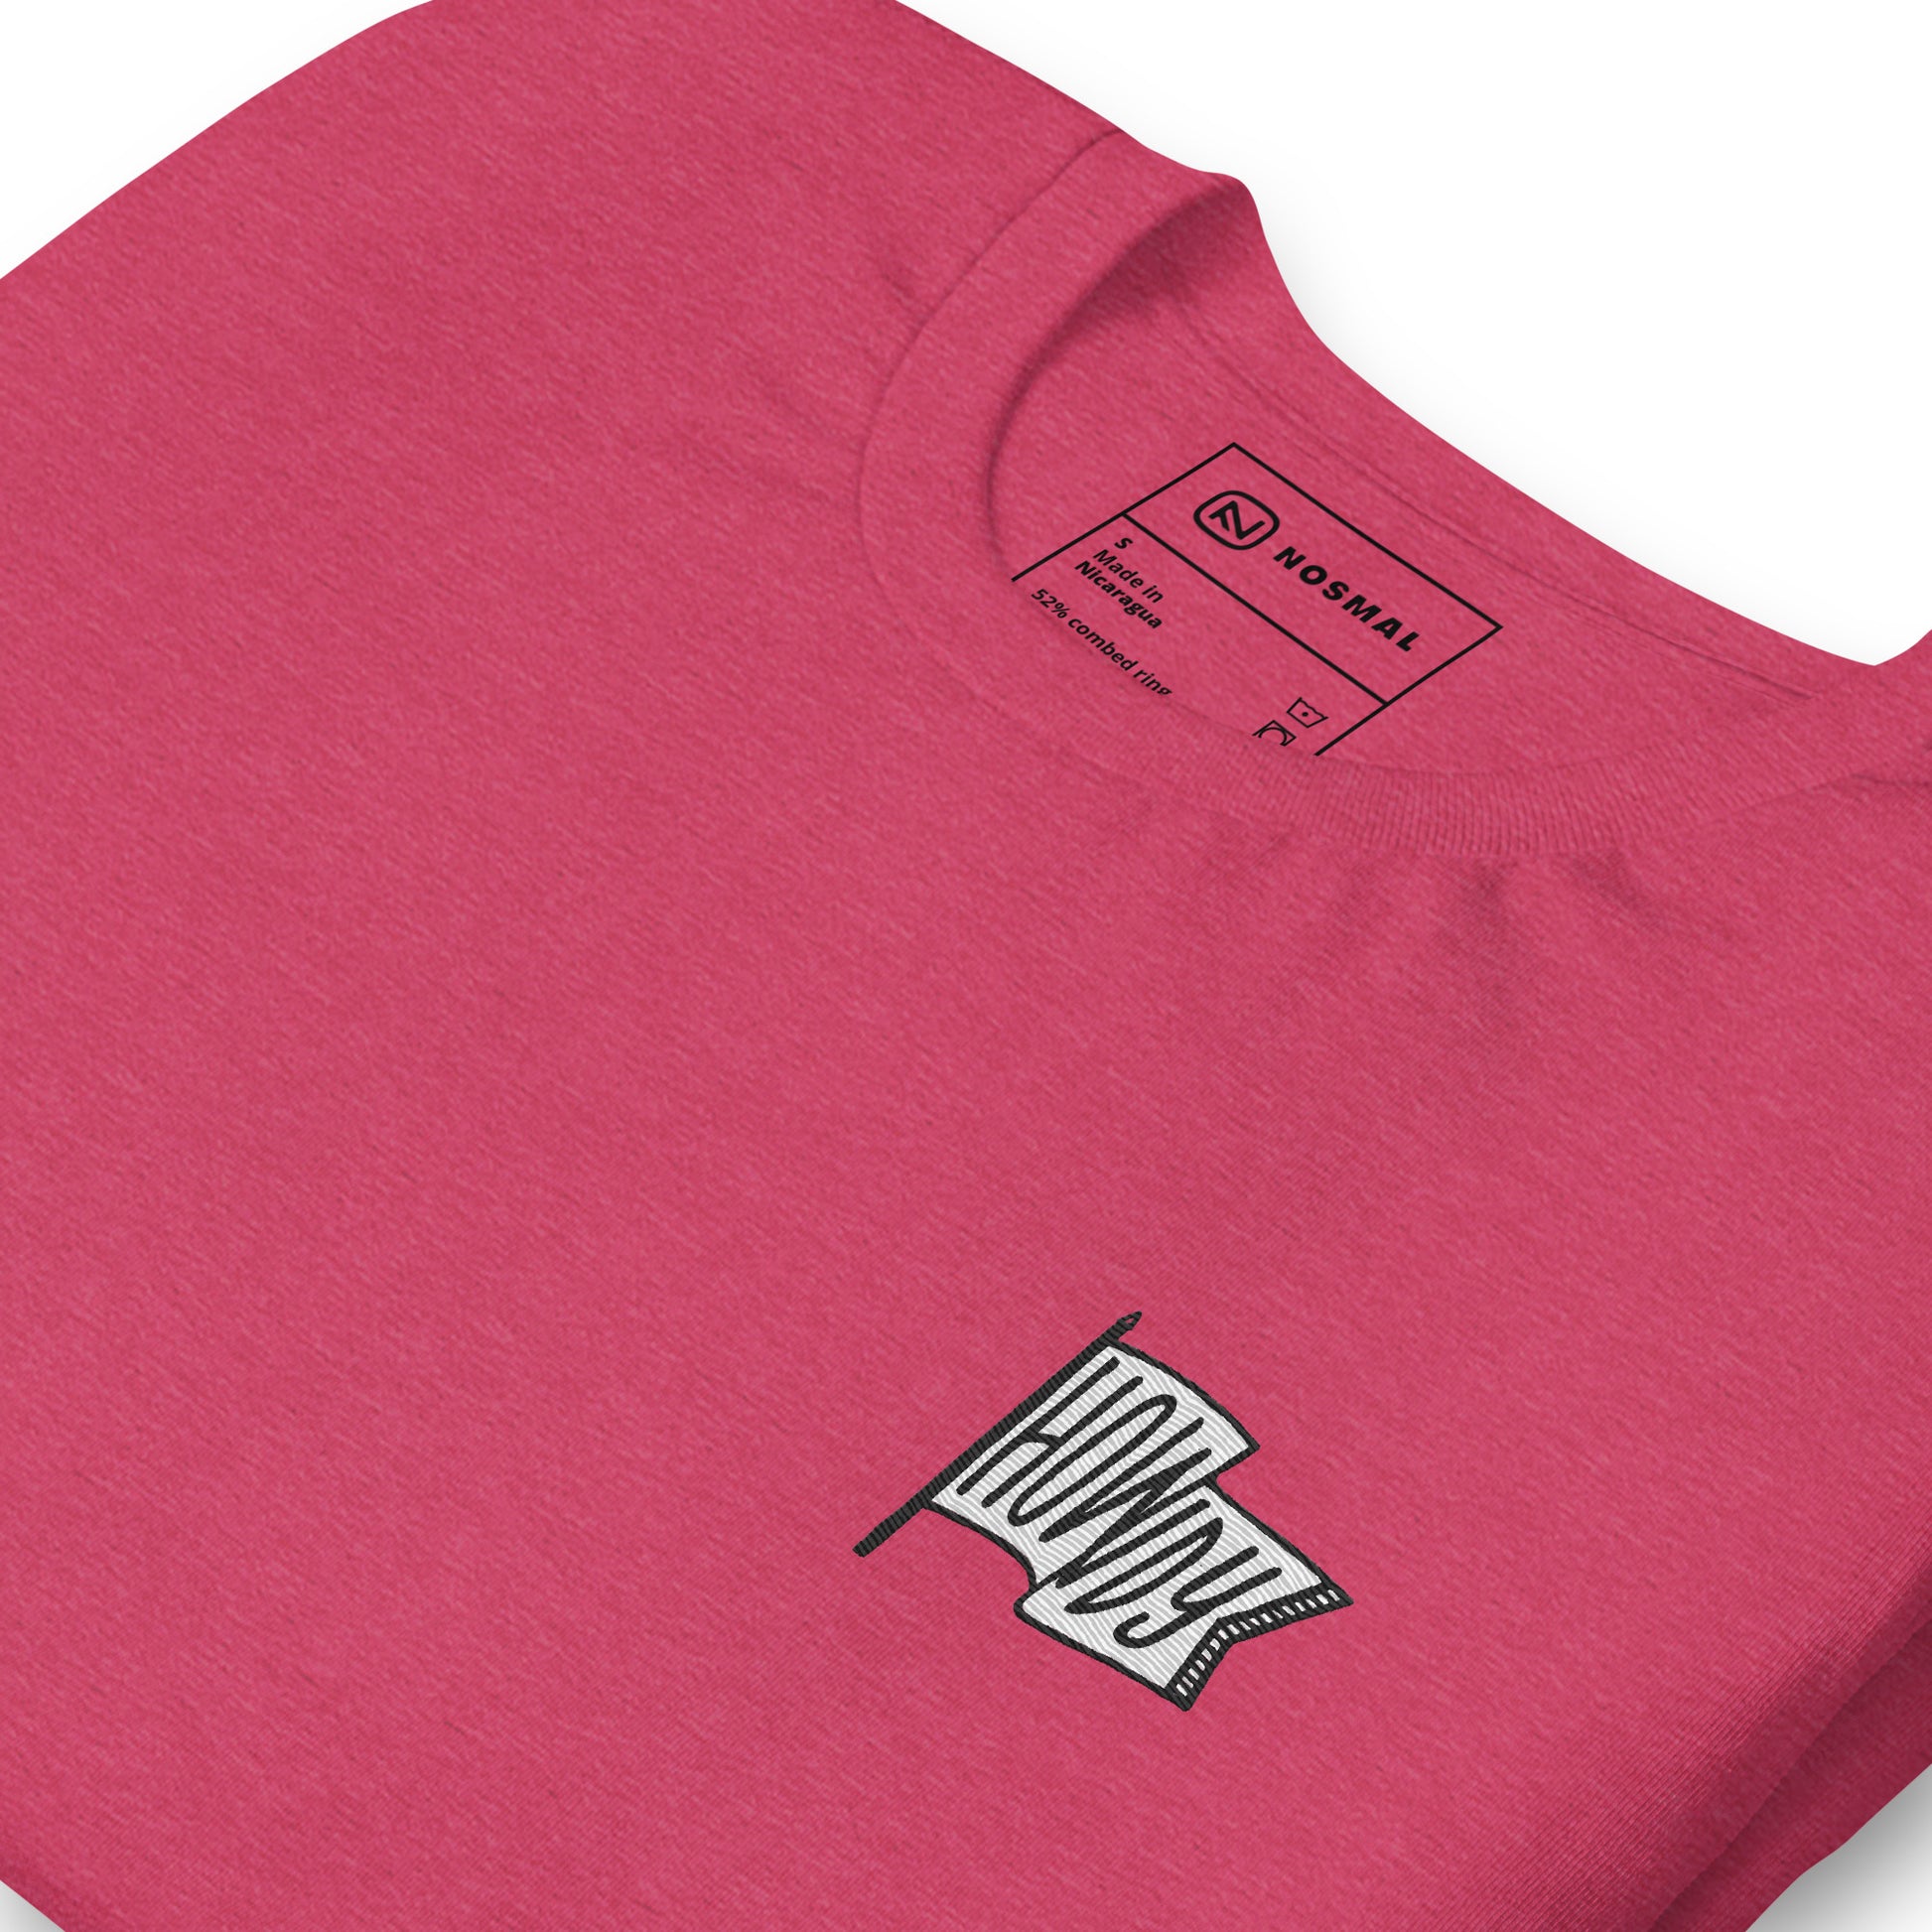 Angled close up howdy embroidered design on heather raspberry unisex t-shirt.